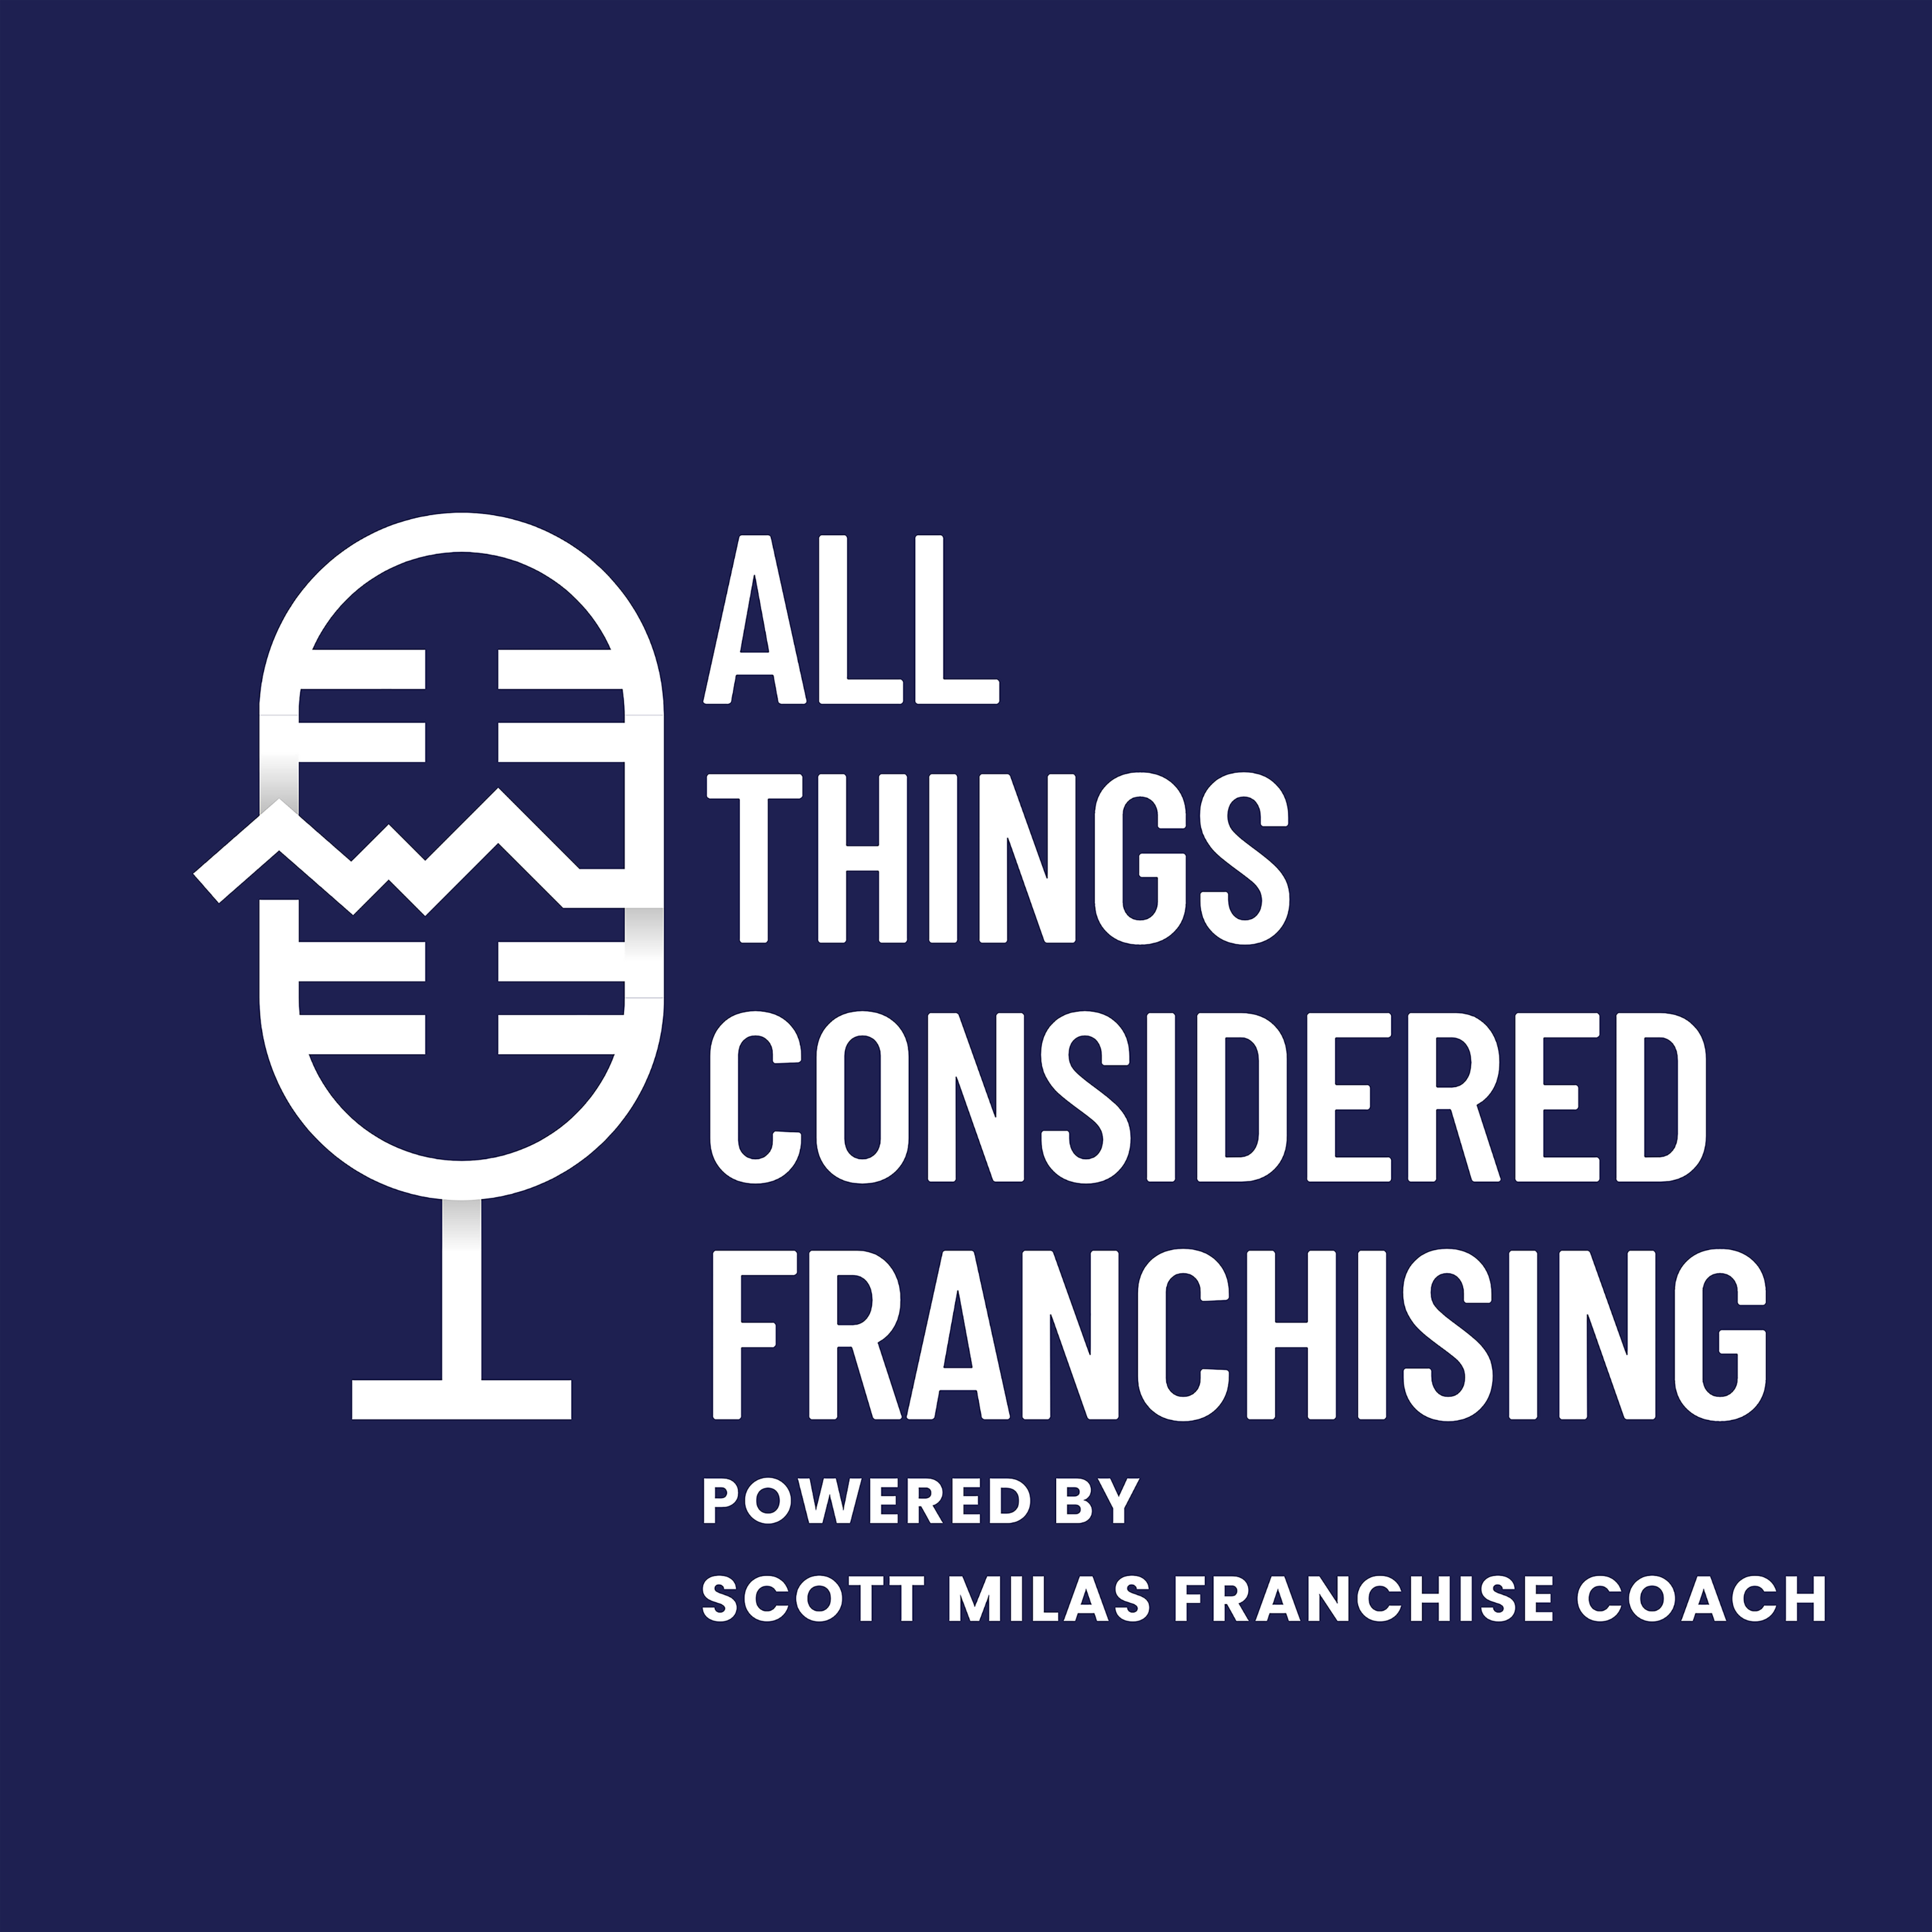 Scotty Milas' All Things Considered Franchising Podcast with Martin McDermott of Franchise Interviews